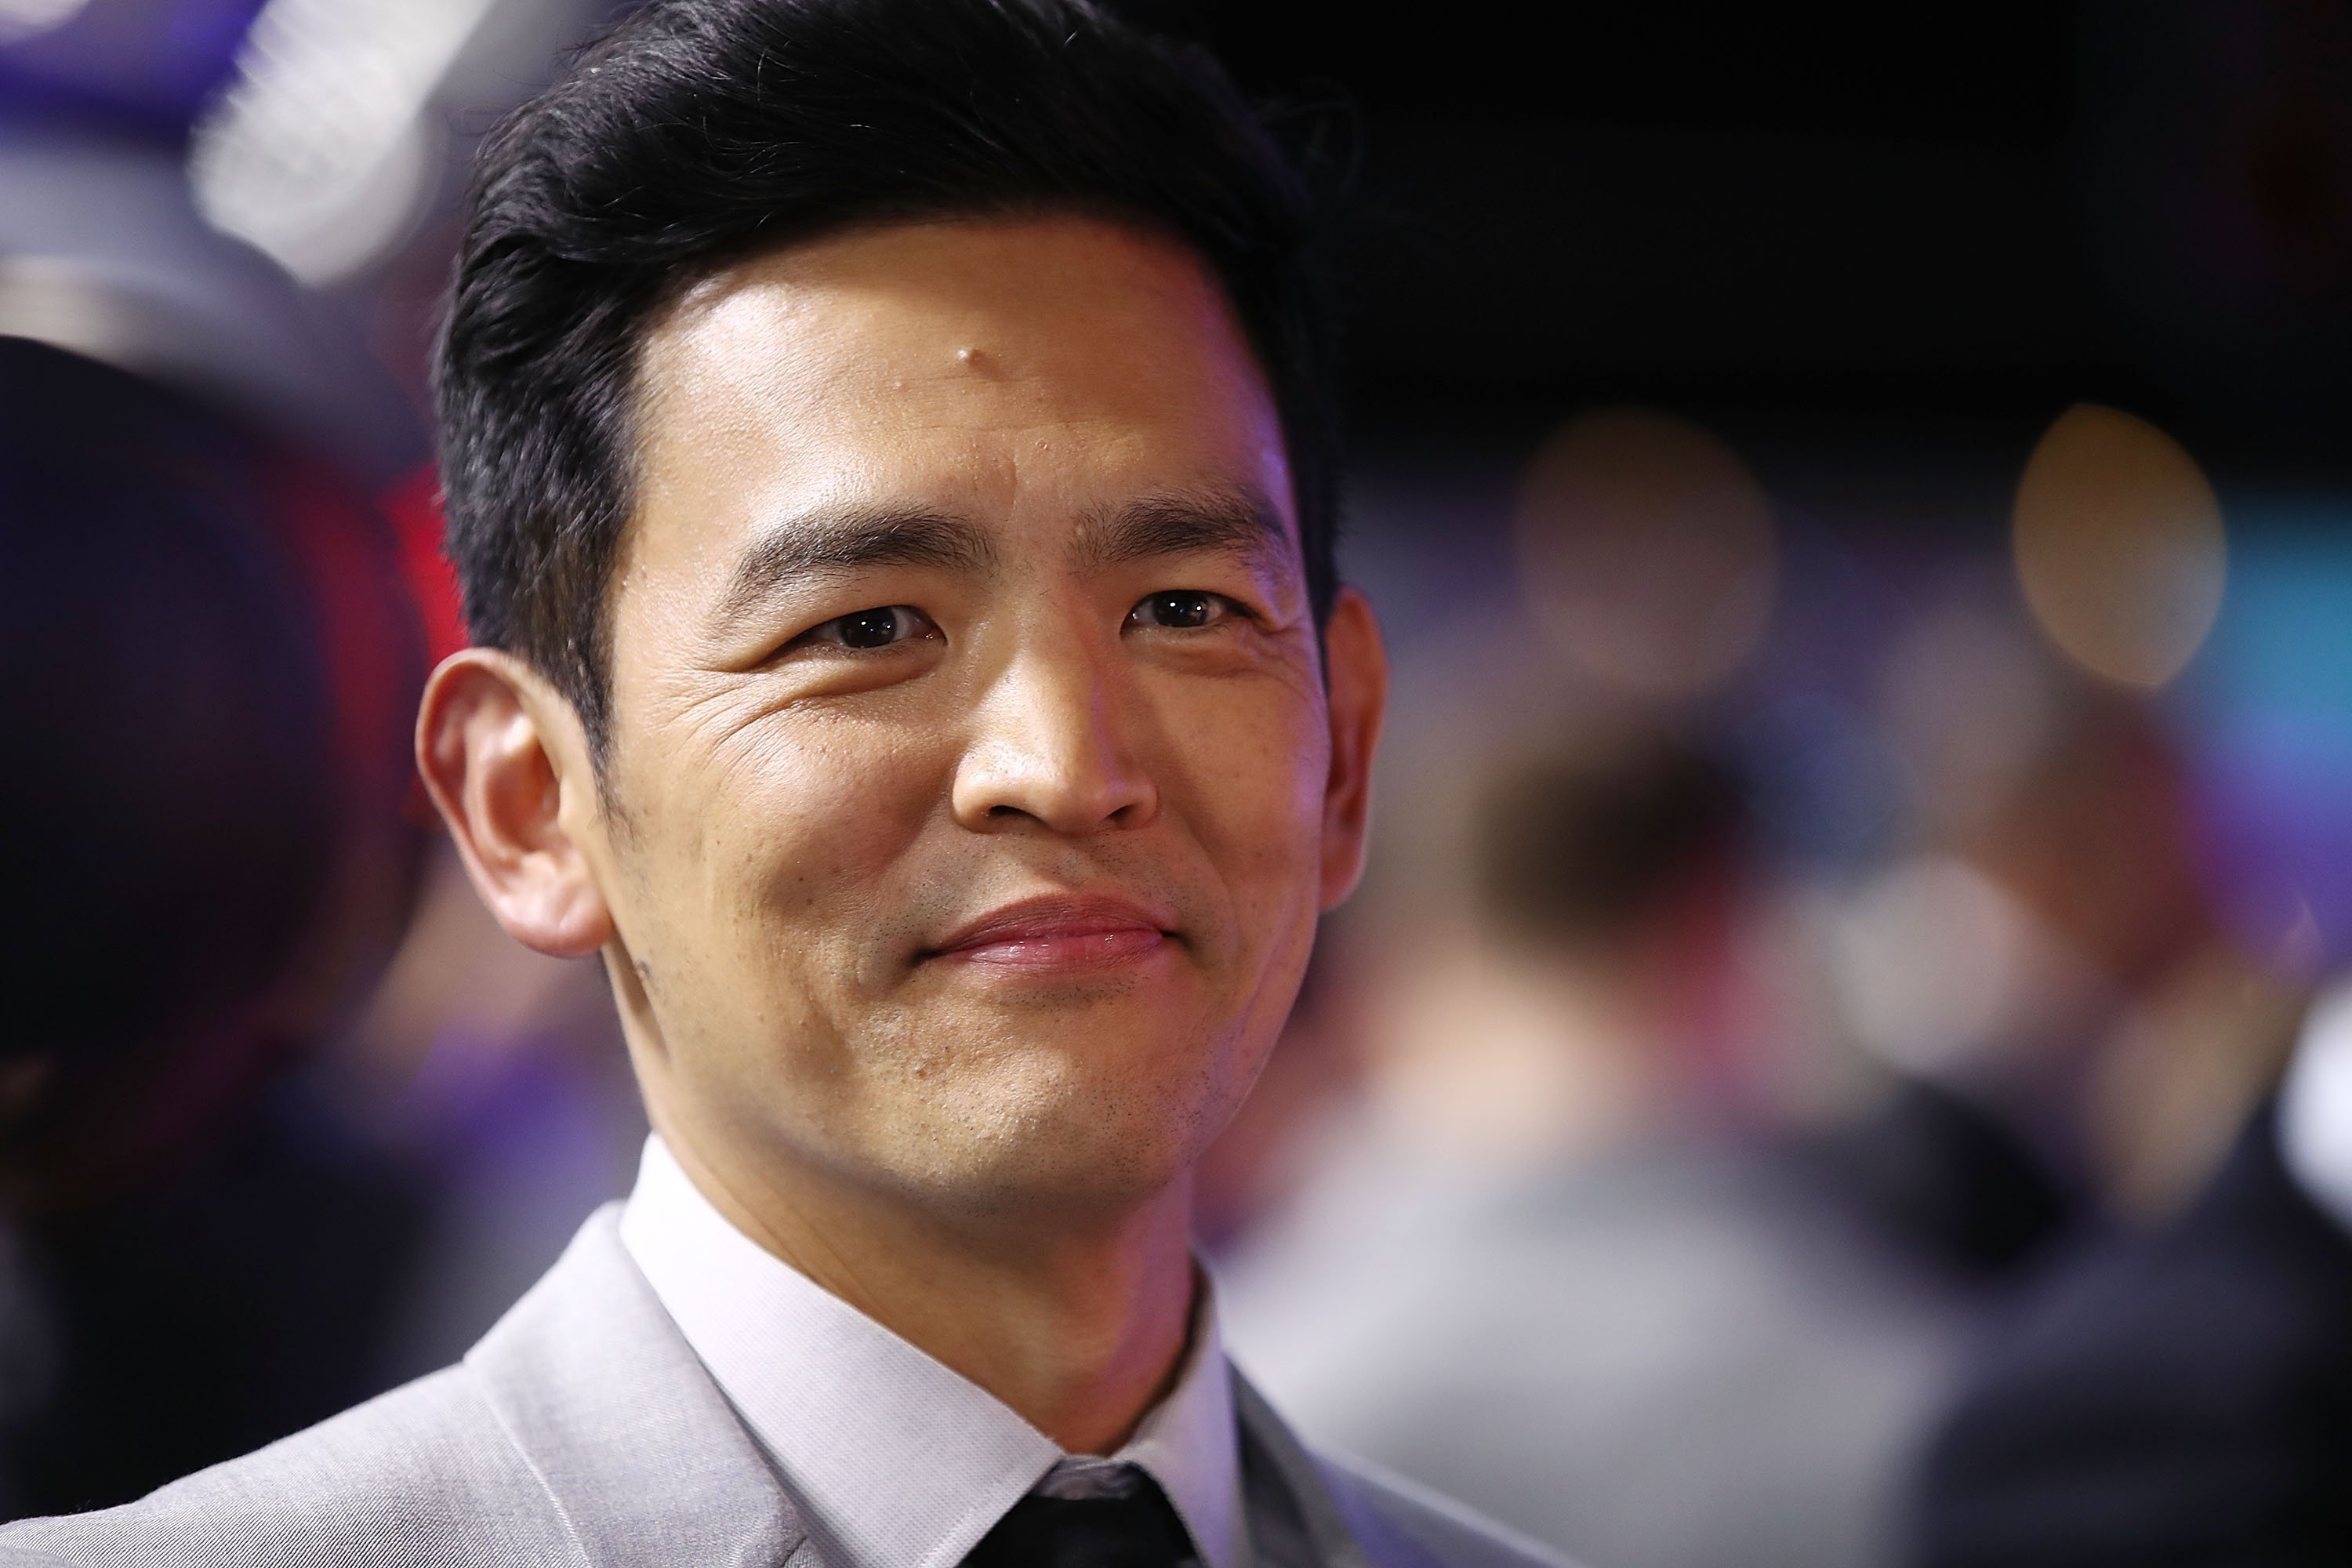 John Cho on 'Today': George Takei Was a 'Beacon' for Me